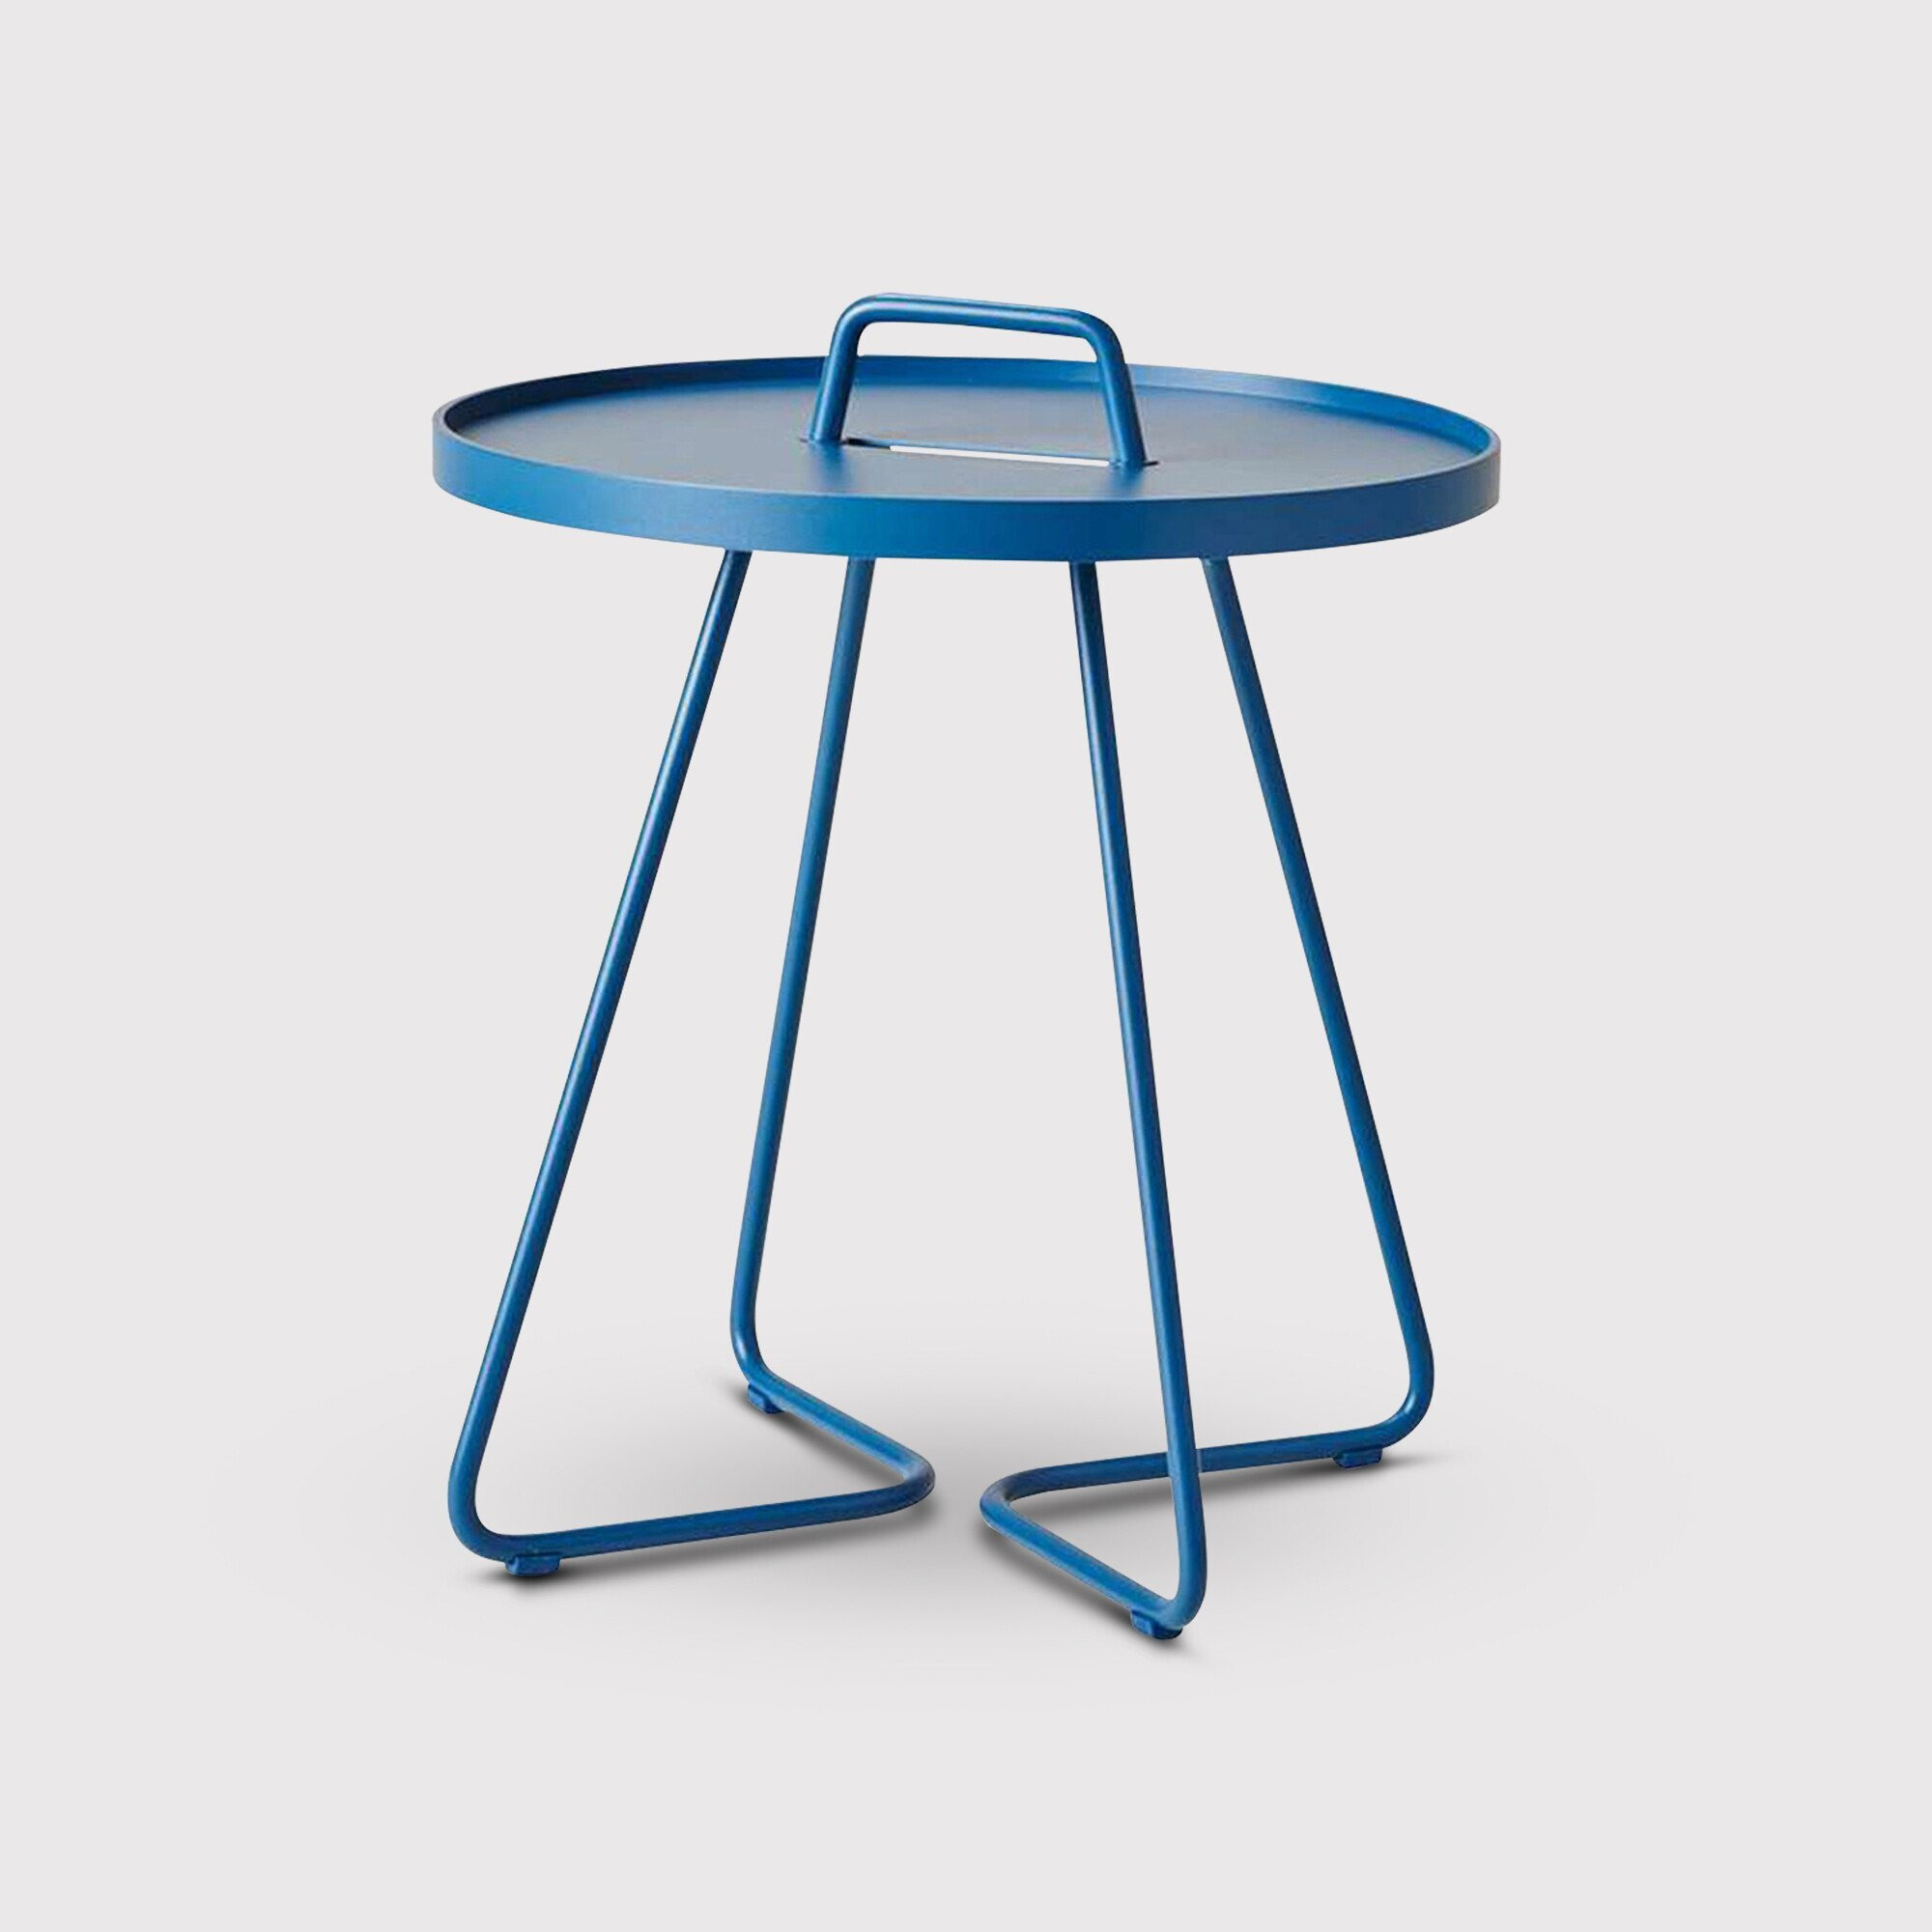 Cane Line On The Move Small Side Table, Round, Blue Metal - Barker & Stonehouse - image 1